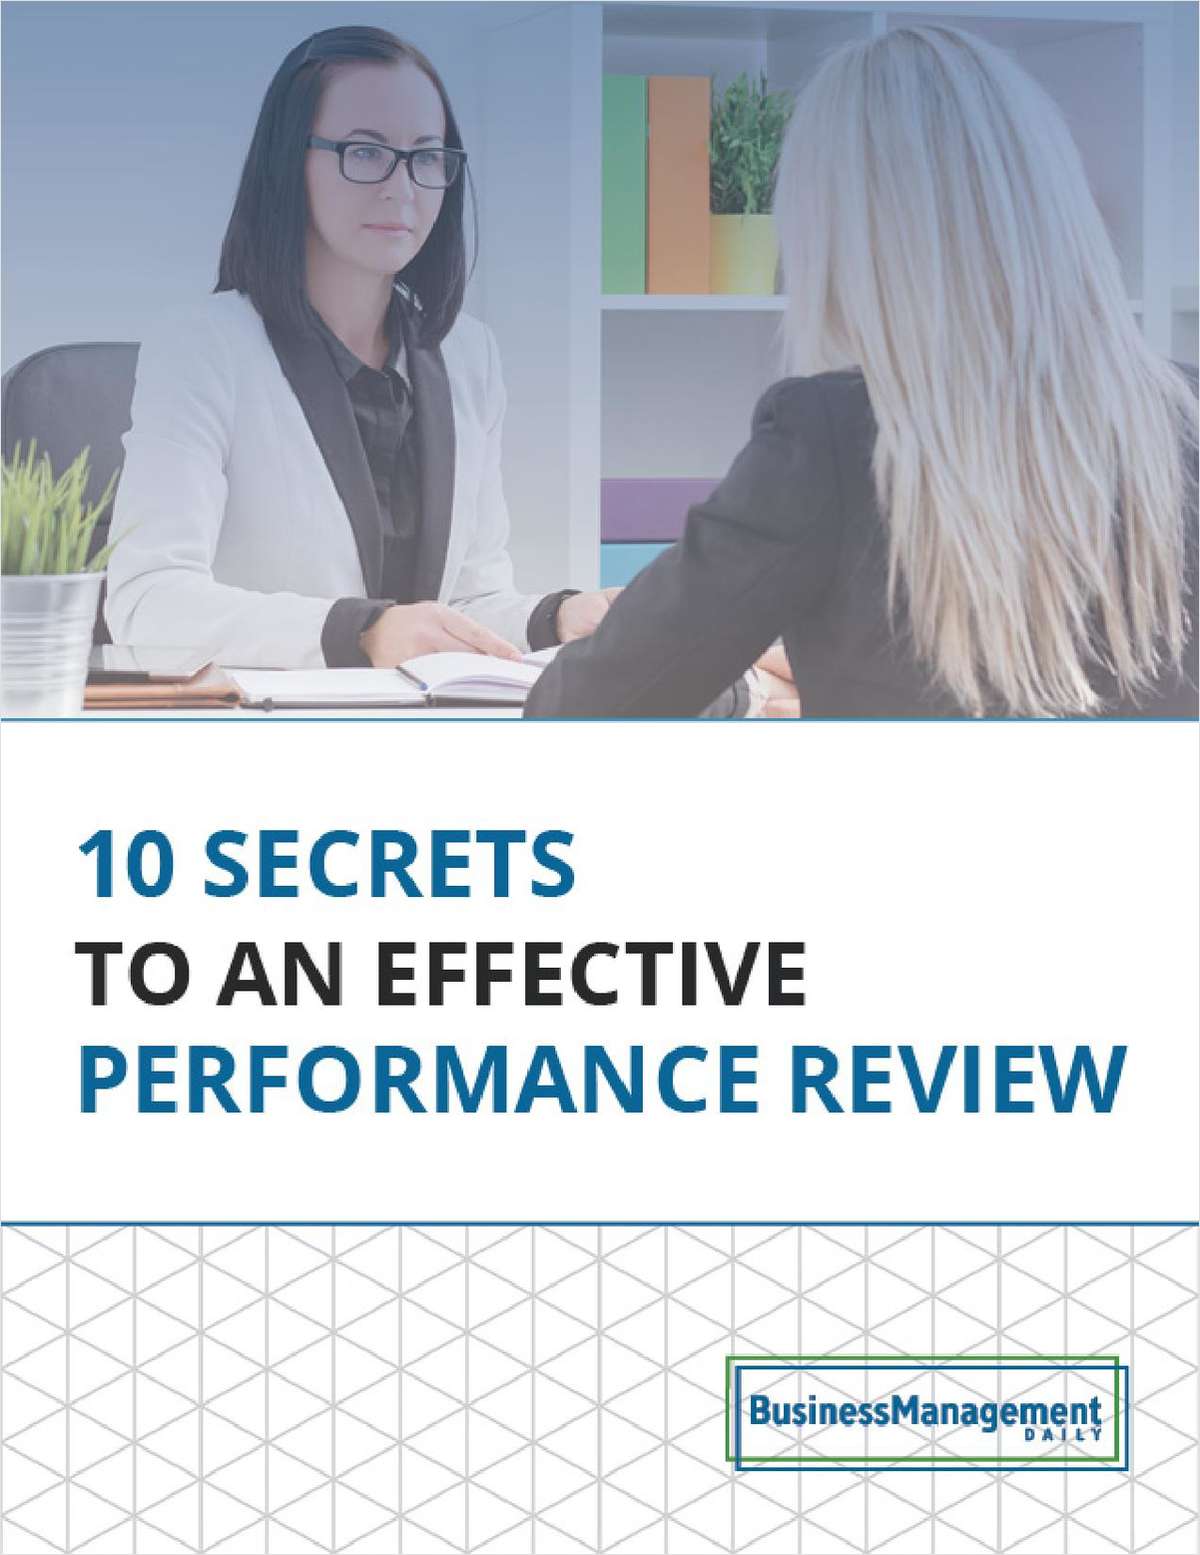 Performance review examples, tips, and secrets